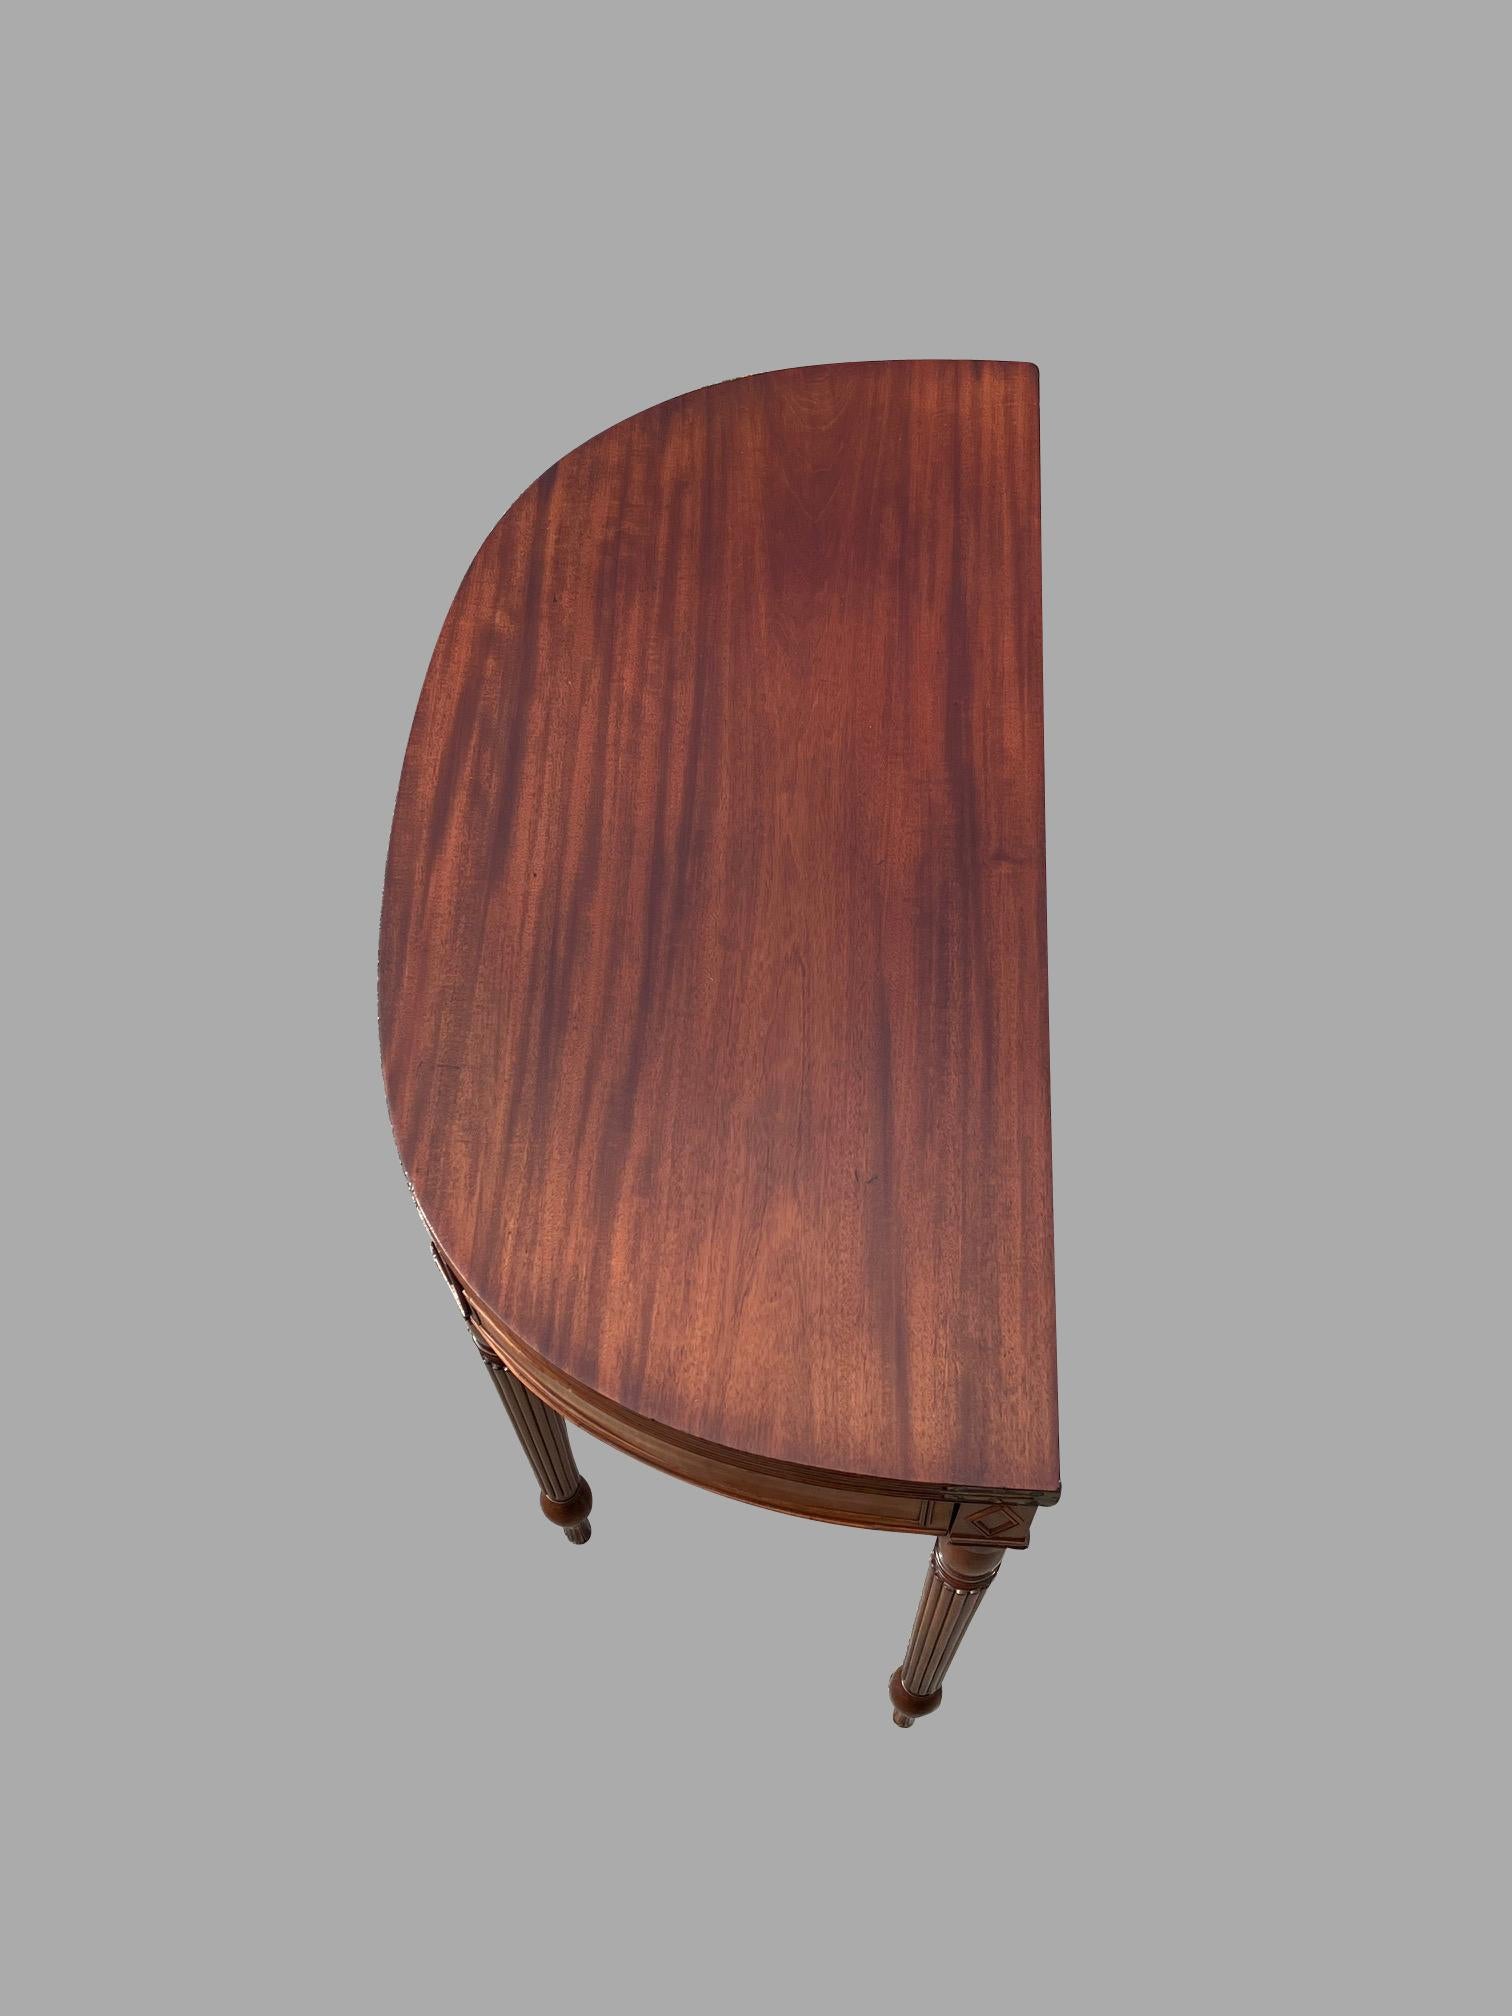 English Regency Period Mahogany Flip Top Game or Tea Table with Reeded Legs In Good Condition For Sale In San Francisco, CA